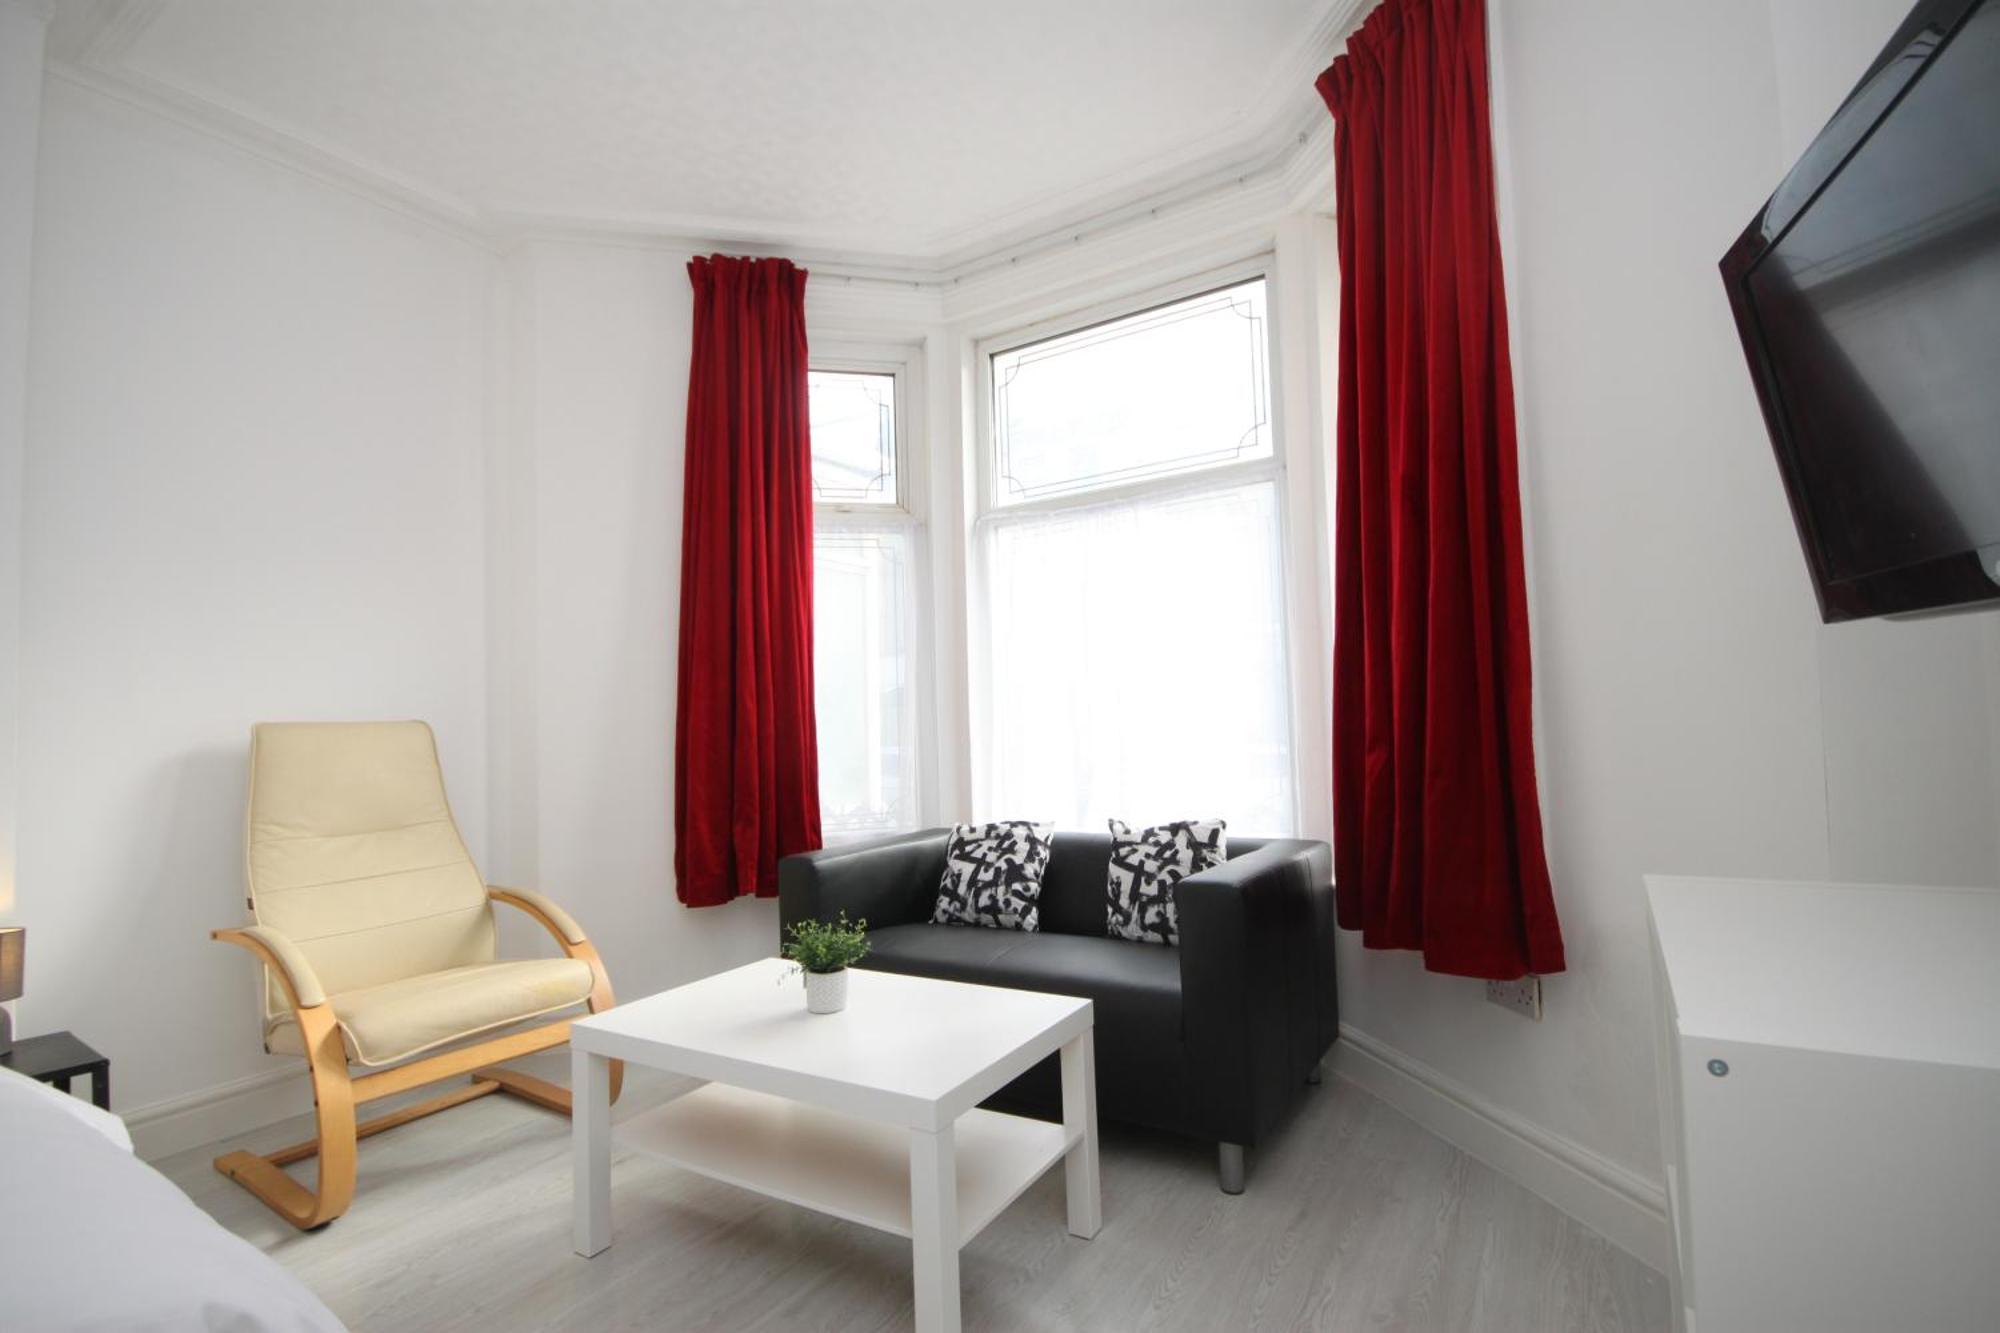 Barton Beachside Apartments - Free Parking, Modern Chic, Central Beach Location, Some Sea Views - Families Couples Or Over 23 Years Blackpool Room photo